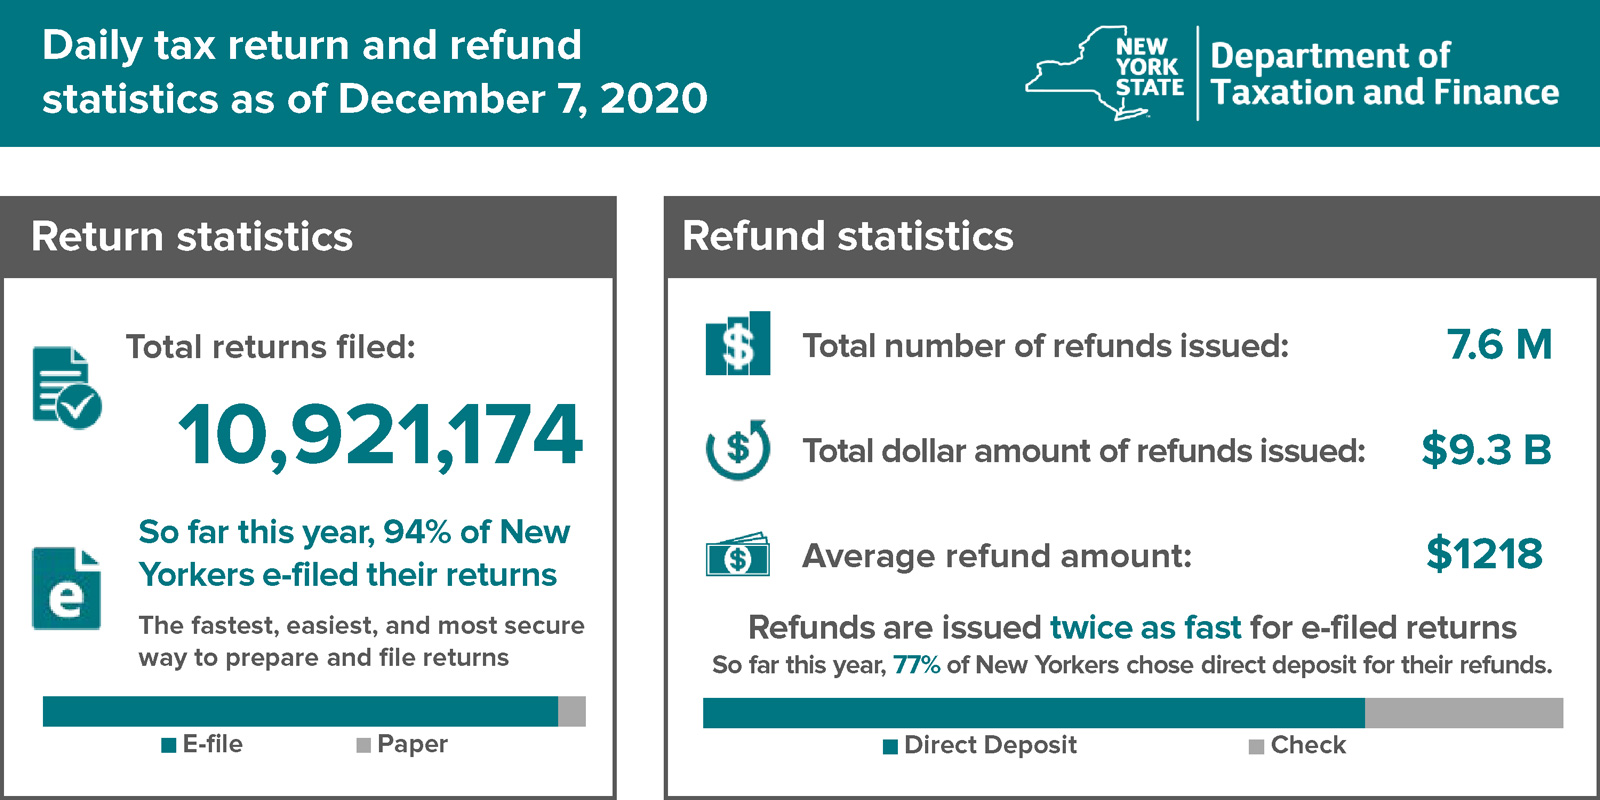 Personal income tax return and refund statistics